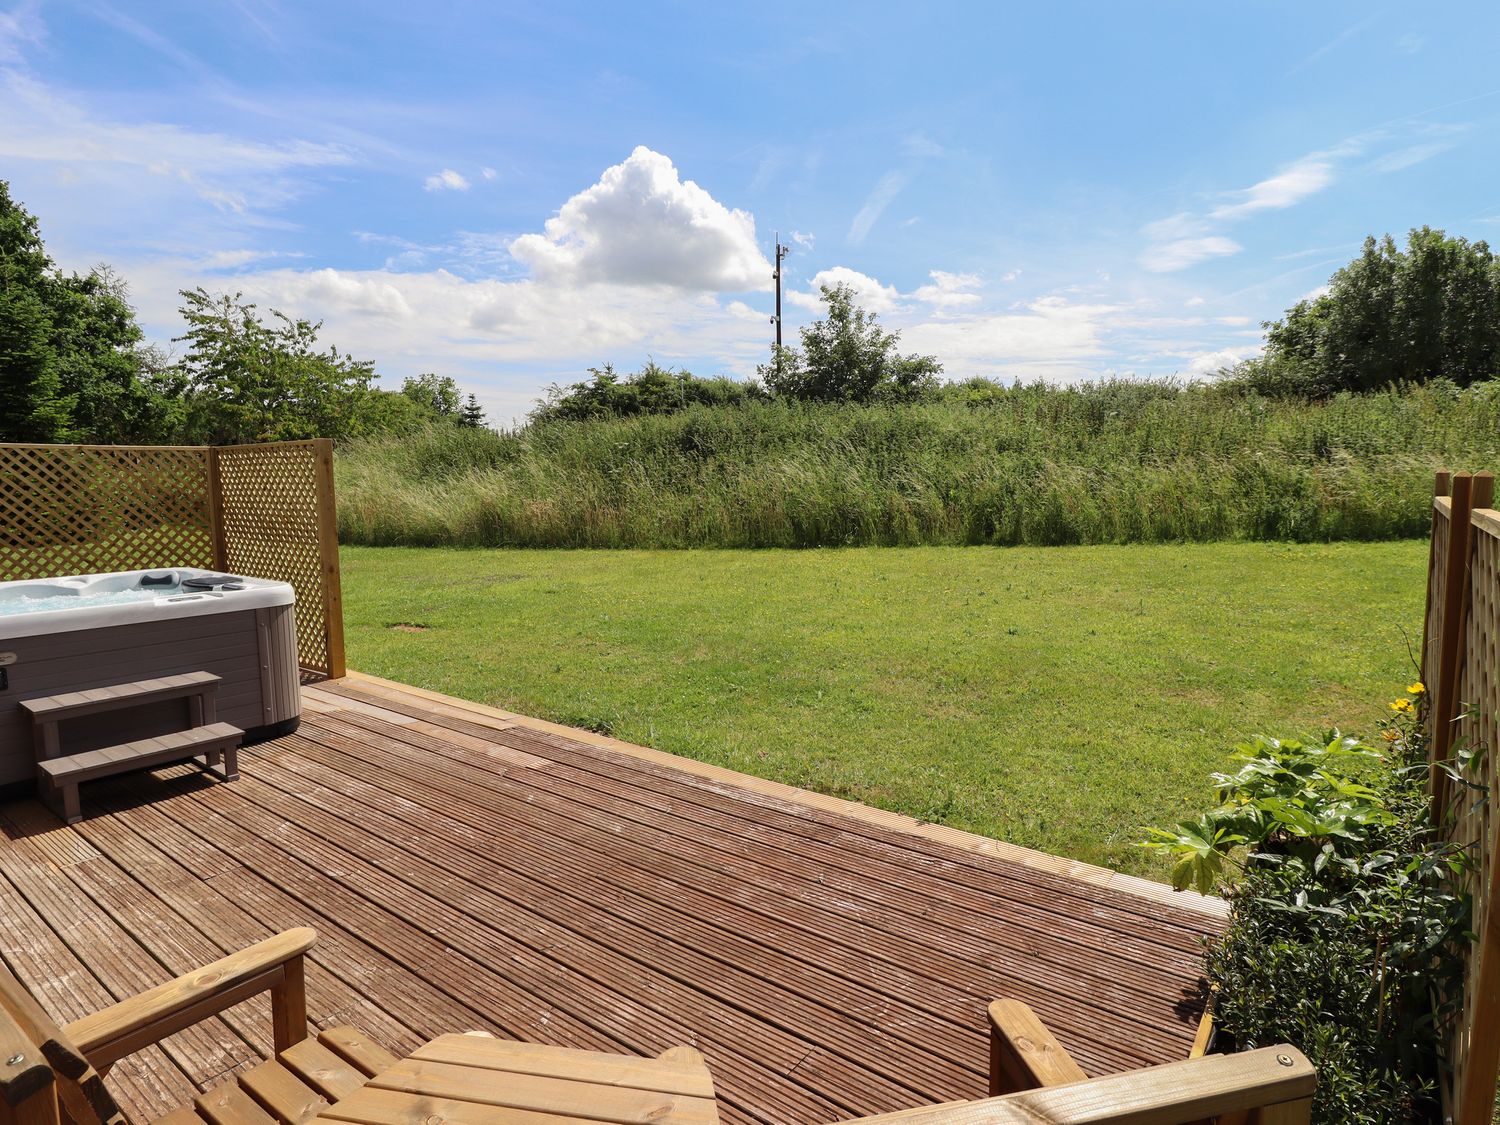 Lodge 1, South Hykeham, Lincolnshire, off-road parking, private front decking with hot tub, Smart TV